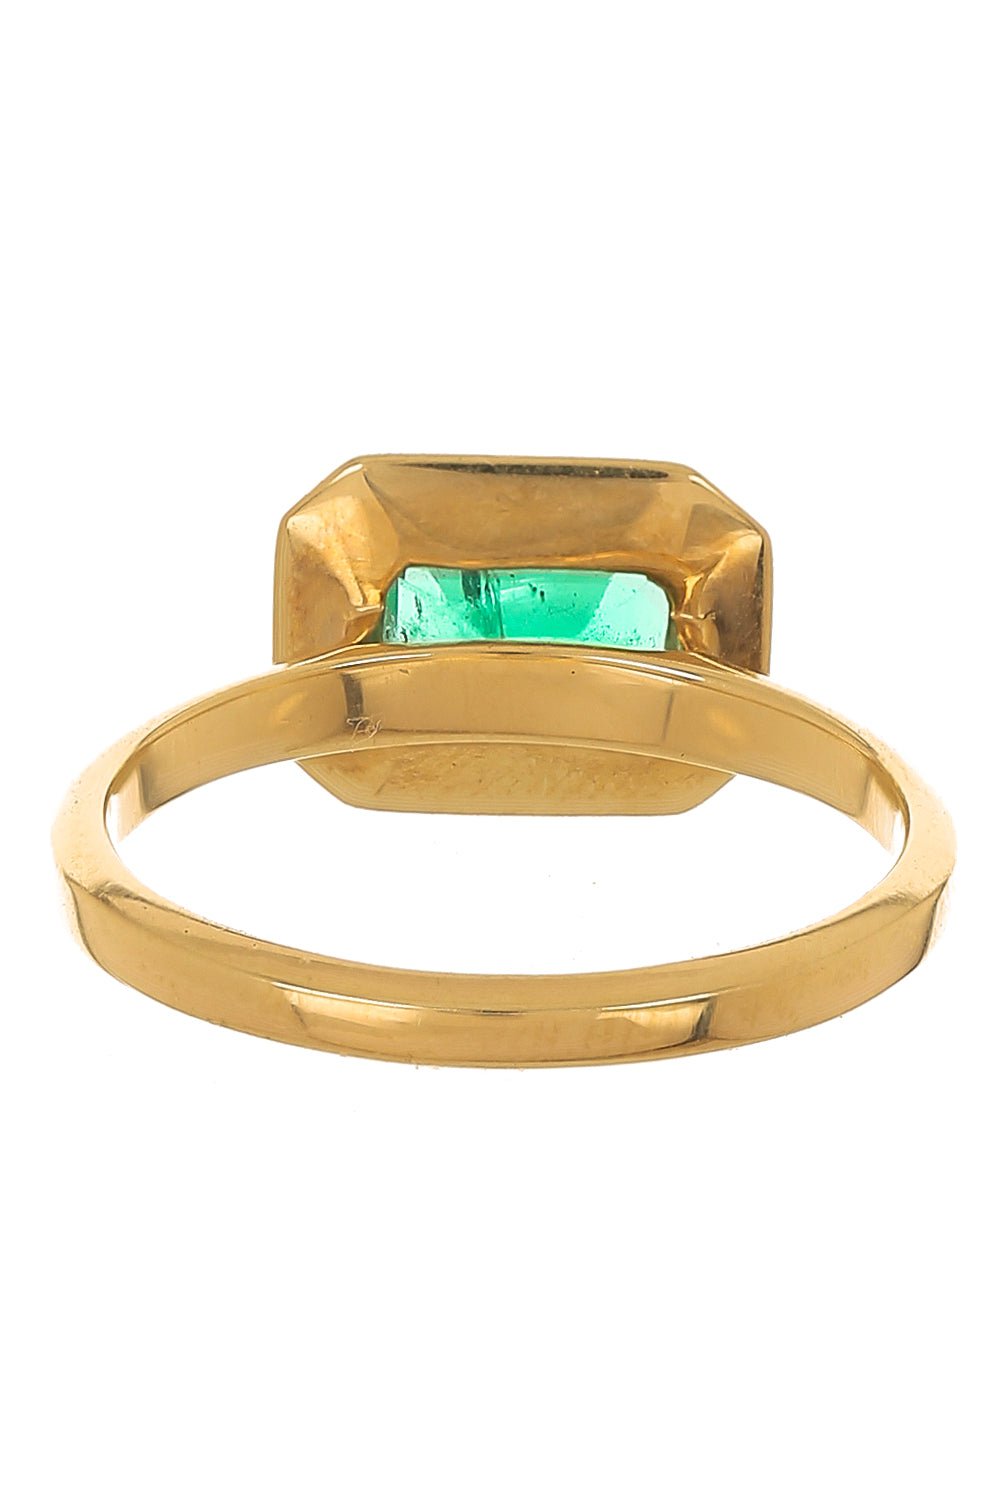 YI COLLECTION-Emerald Nouveau Ring-YELLOW GOLD